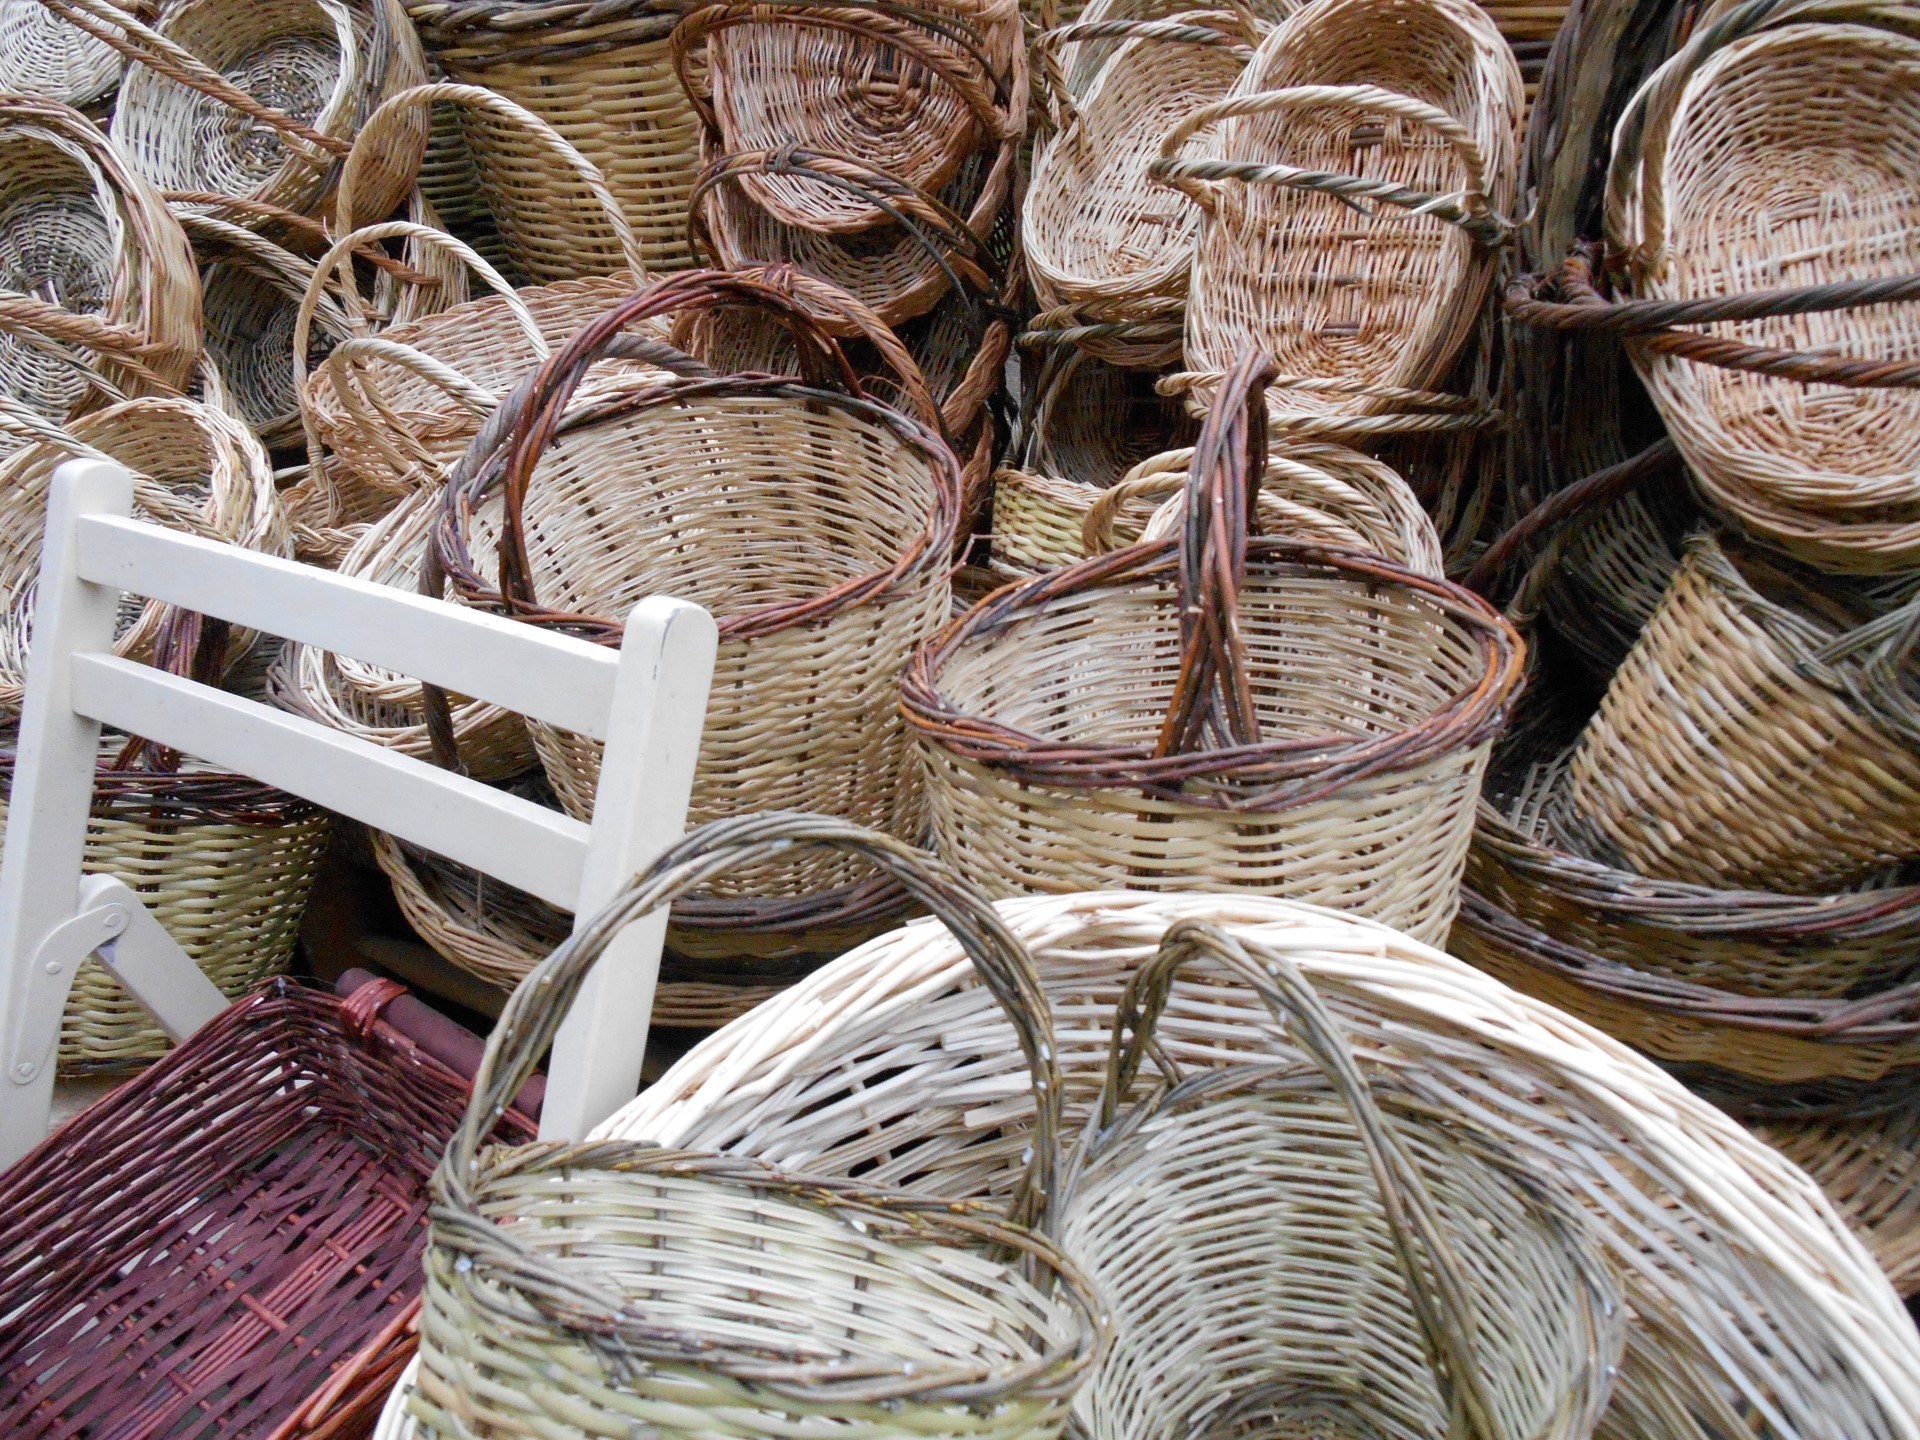 a display of basket baskets that are different sizes